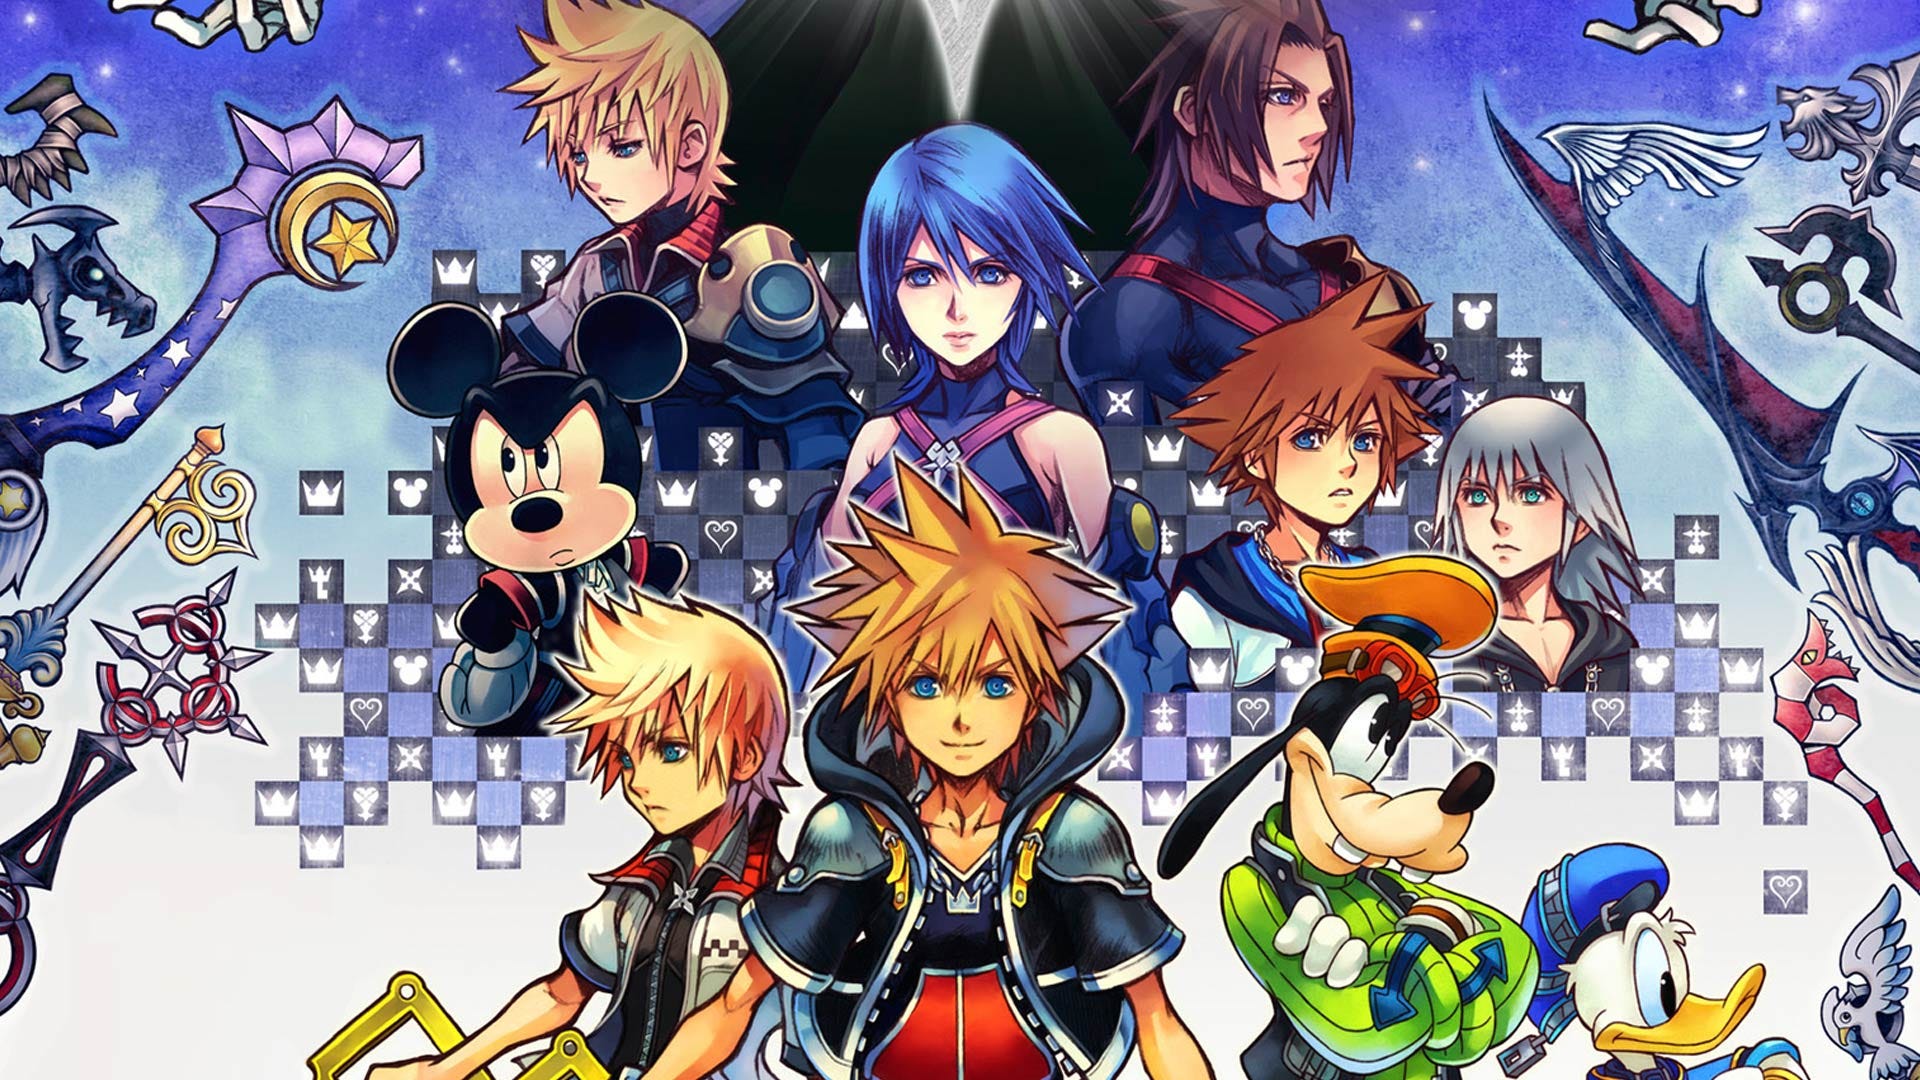 Is Birth by Sleep The Best Kingdom Hearts Game? - The Game Collection  Review! 